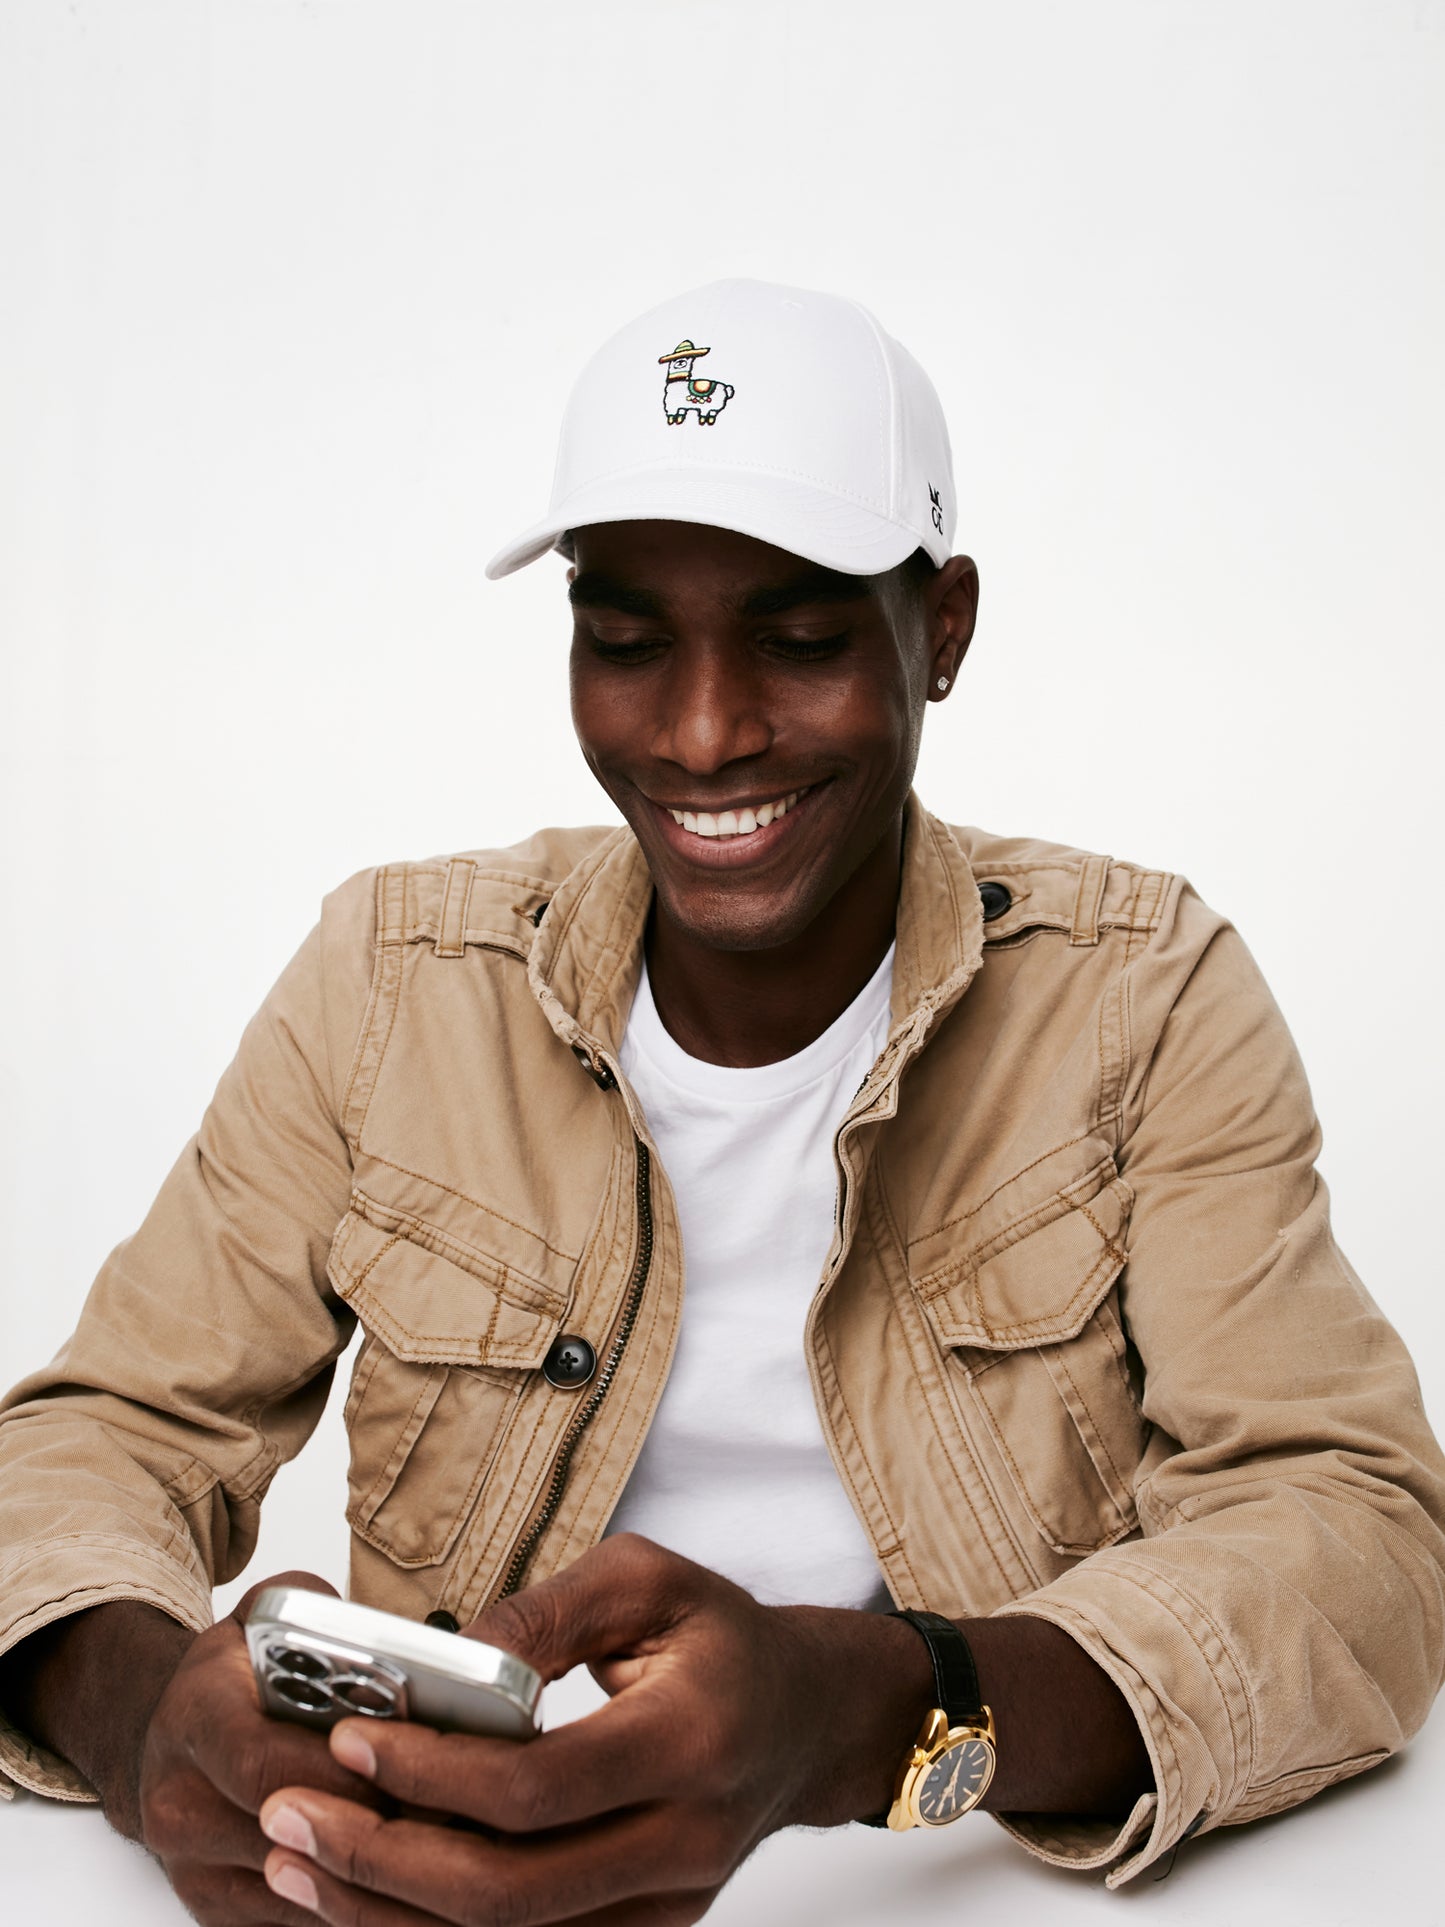 MOOD male model wearing Mexillama baseball cap in white color product shoot and smiling using his phone